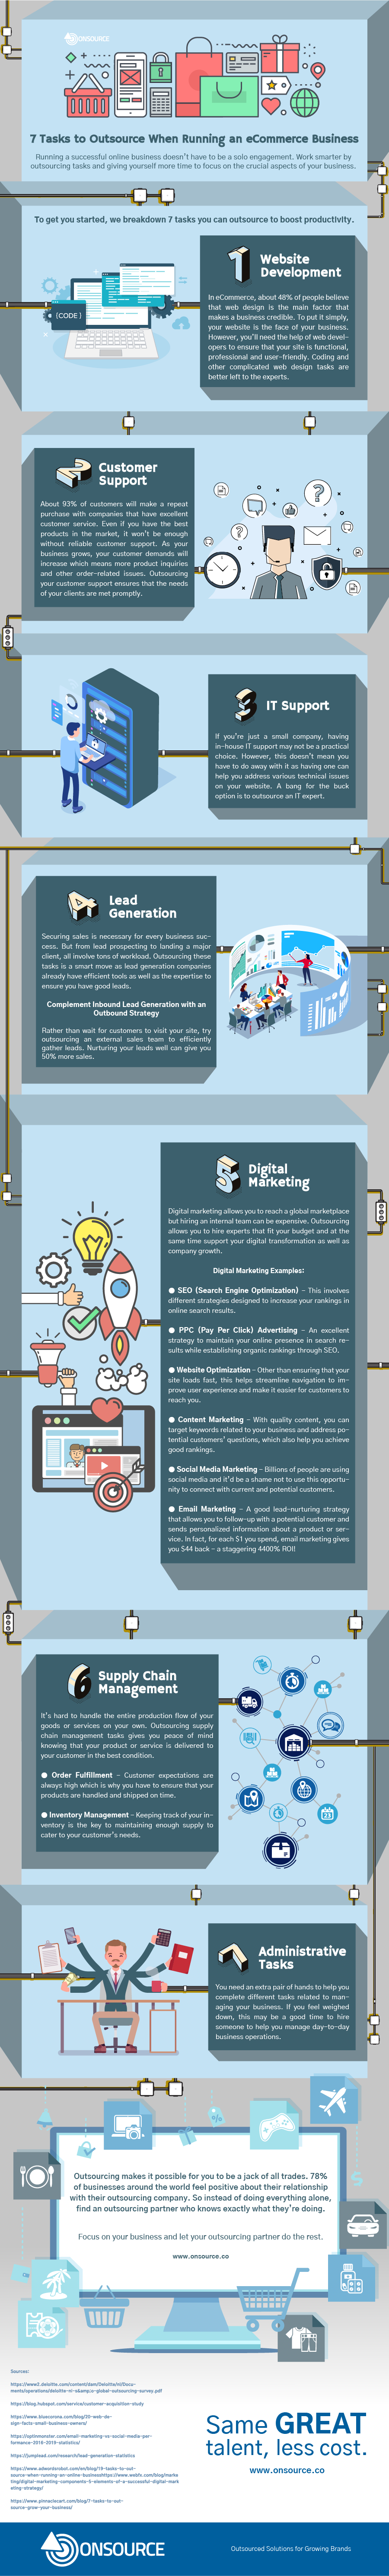 7 Tasks to Outsource When Running an eCommerce Business #infographic